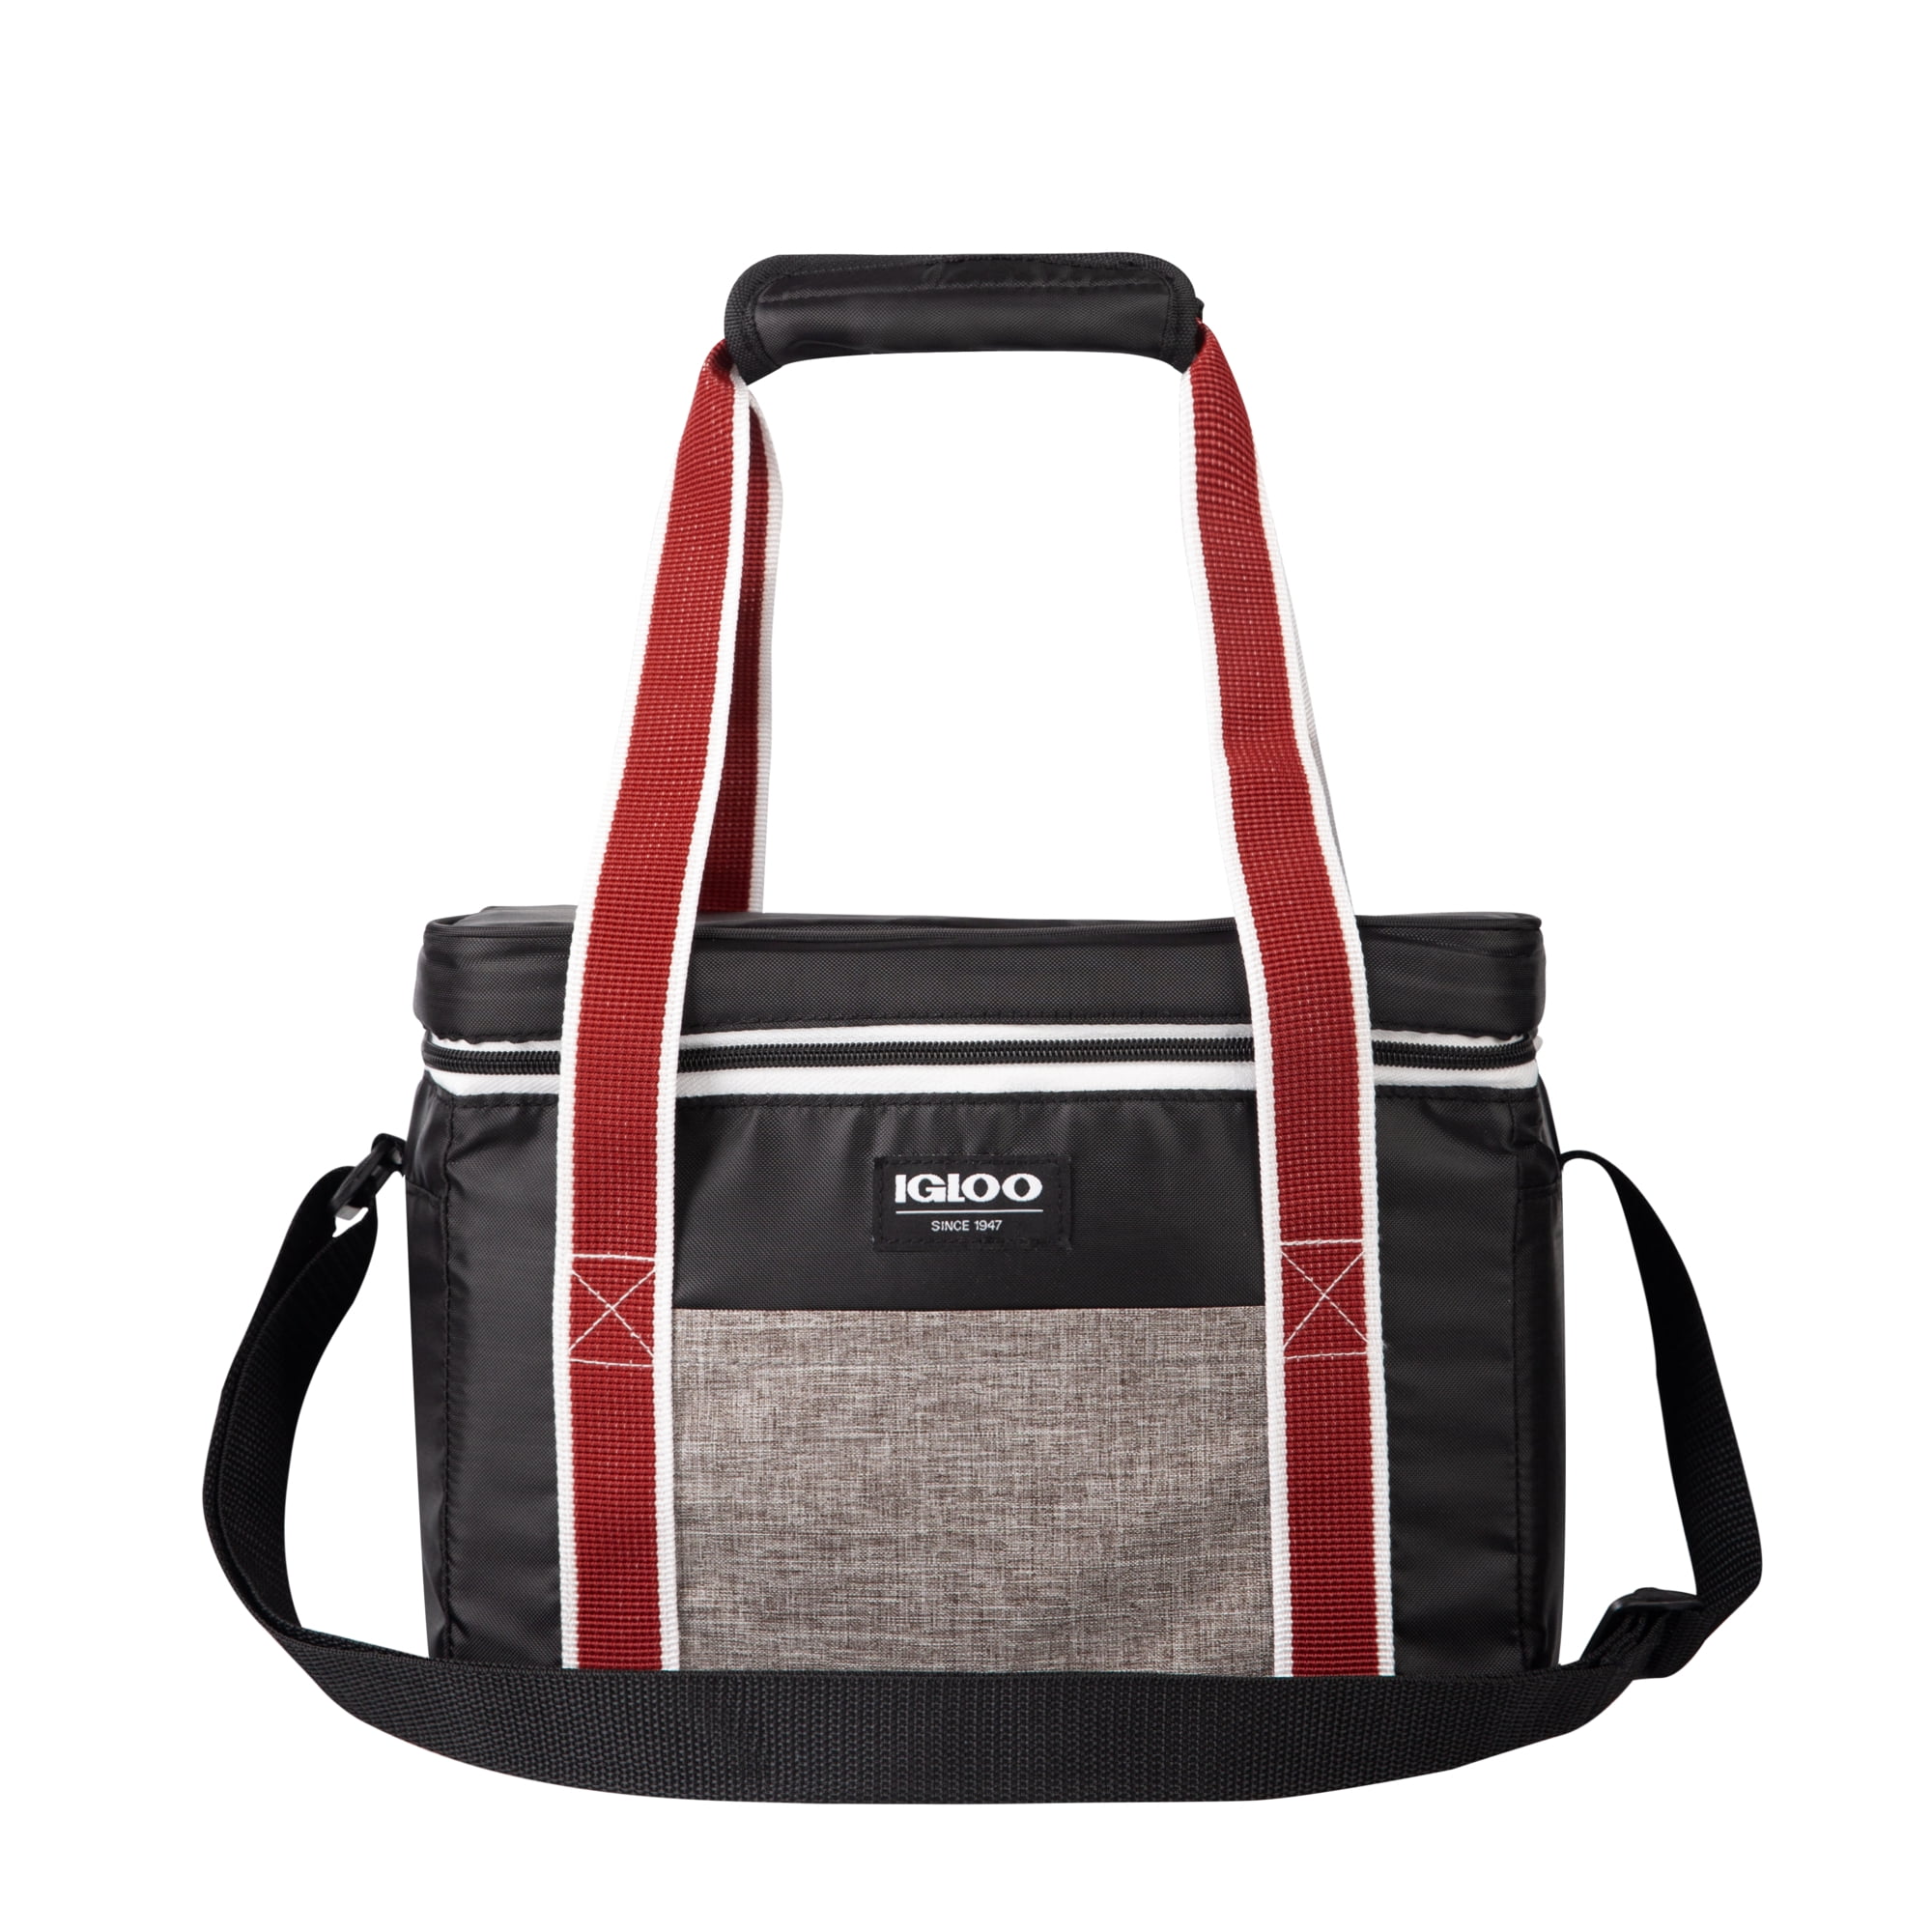 Igloo 12 Can Heritage Lunch Companion Cooler Bag - Black